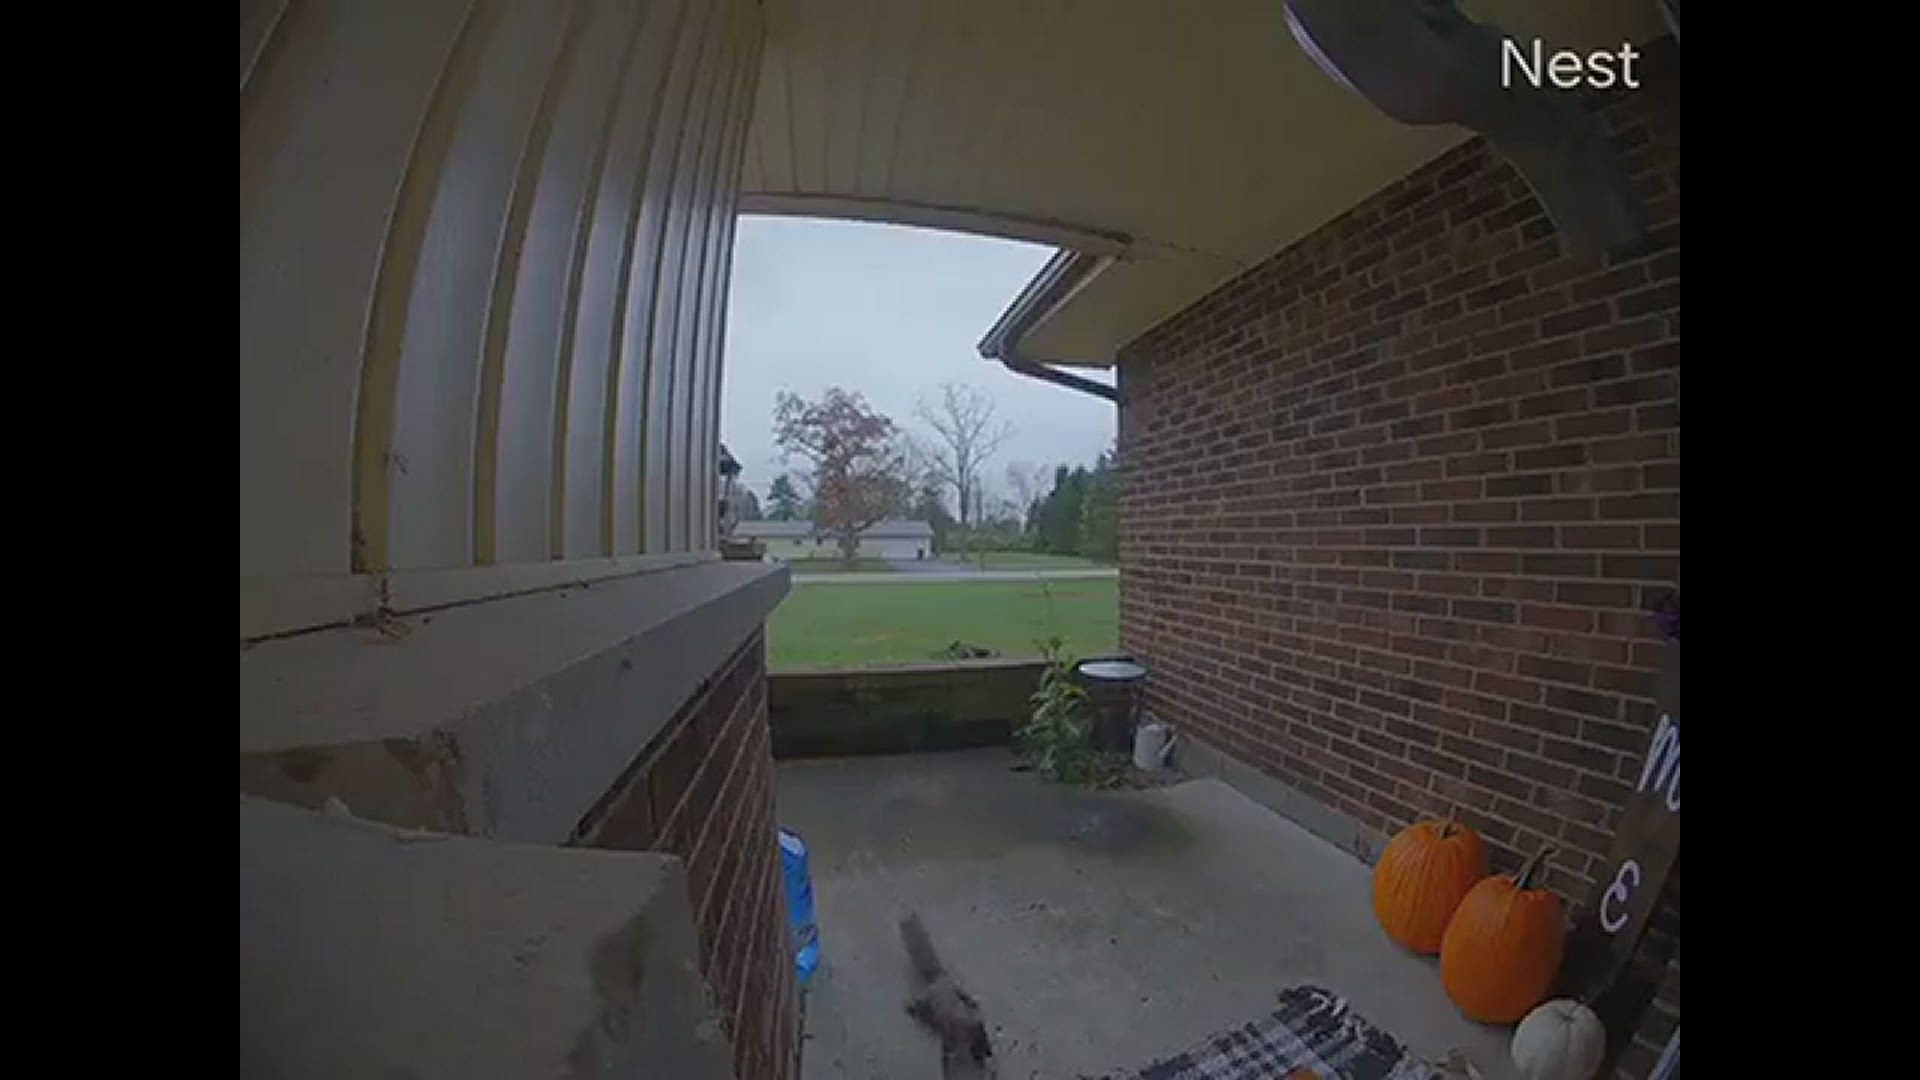 My name is Crystal, my cousin Mark Gabenski sent me this of squirrel knocking and leaving nut.
Credit: Mark Gabenski